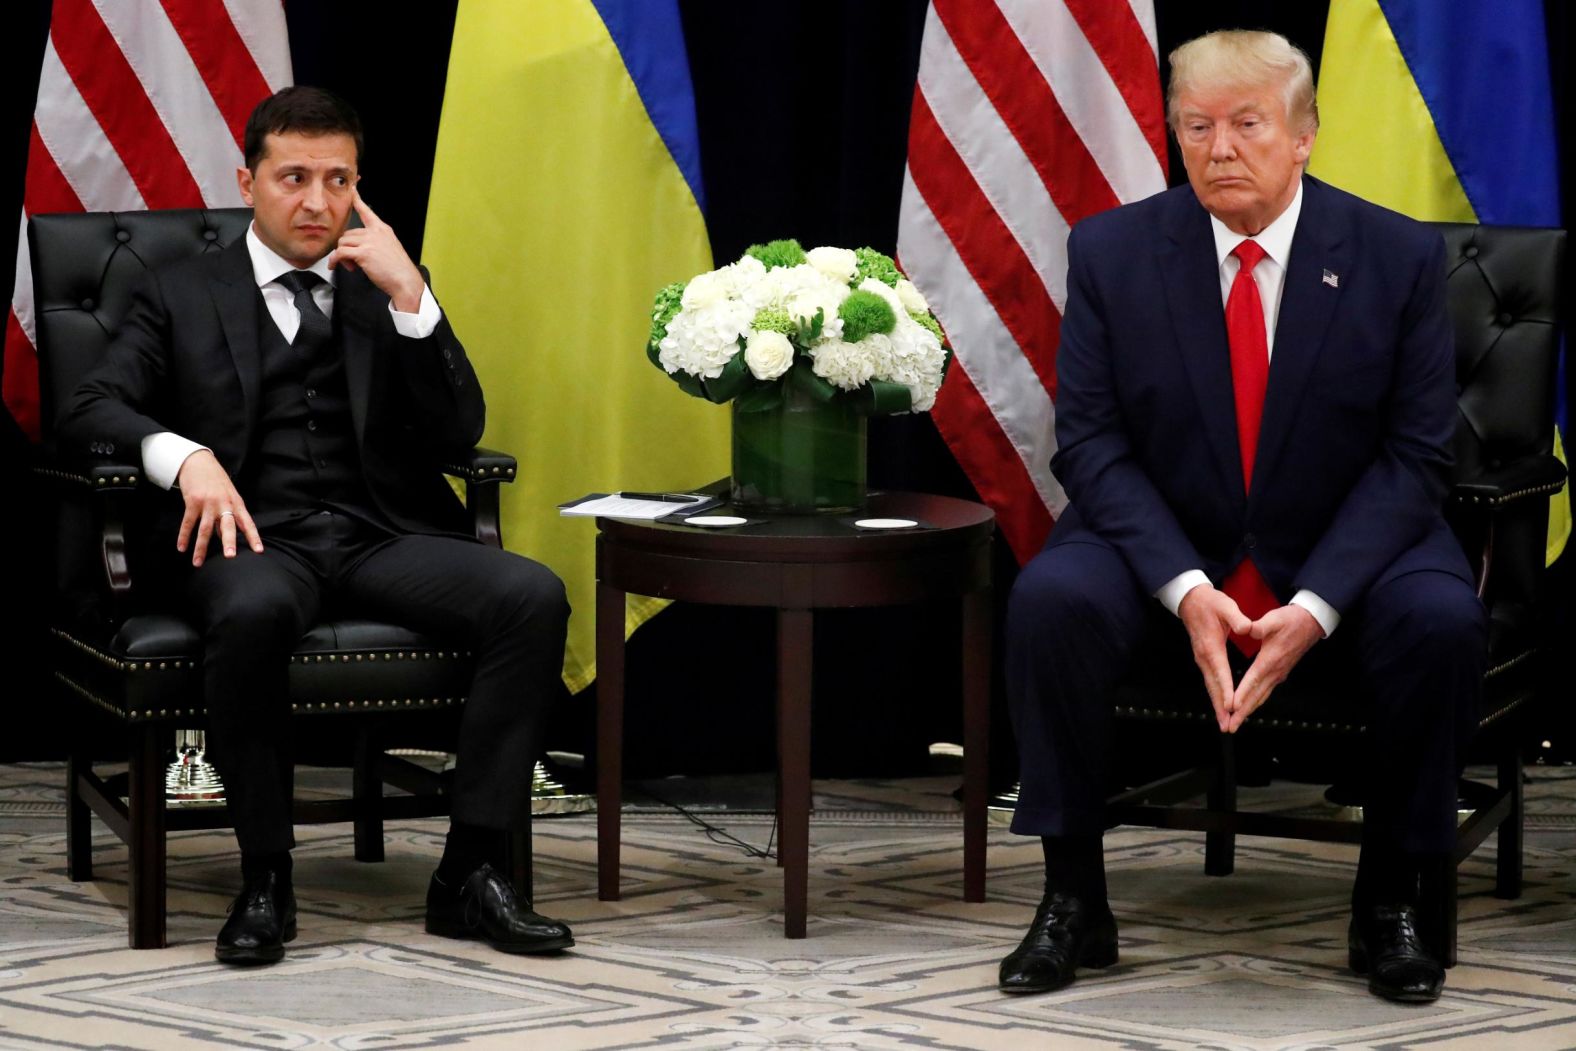 Zelensky and Trump meet on the sidelines of the UN General Assembly on September 25. The men <a href="https://www.cnn.com/2019/09/25/politics/volodymyr-zelensky-donald-trump-meeting-unga/index.html" target="_blank">eagerly sought to deflect questions of wrongdoing </a>after the call transcript was released earlier in the day. "There was no pressure," Trump insisted, denying allegations he was using his position of power to prod Ukraine into investigating a political rival. Zelensky said, "Nobody pushed me."